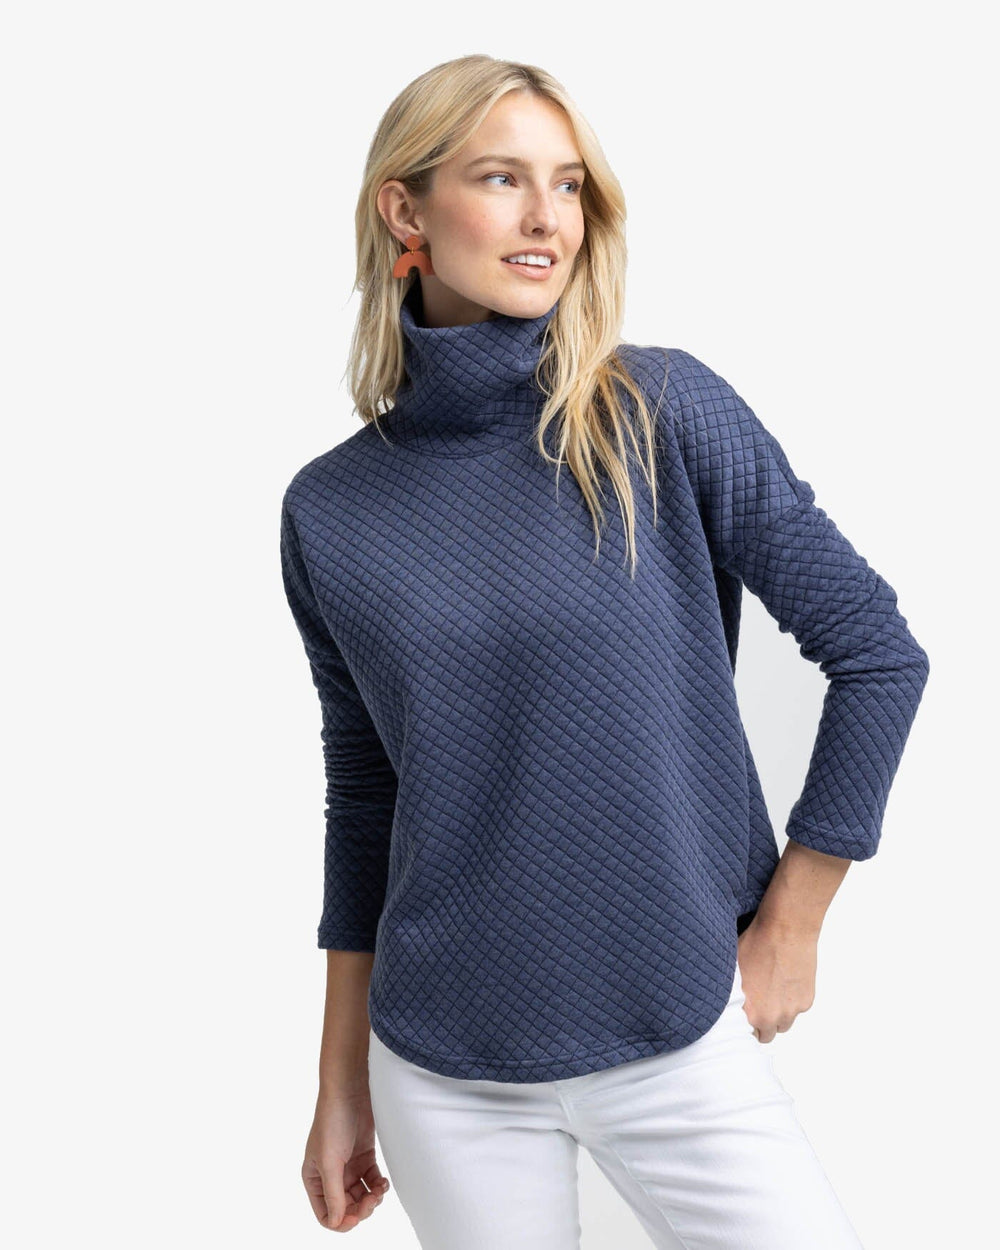 The front view of the Southern Tide Mellie MockNeck Sweatshirt by Southern Tide - Nautical Navy